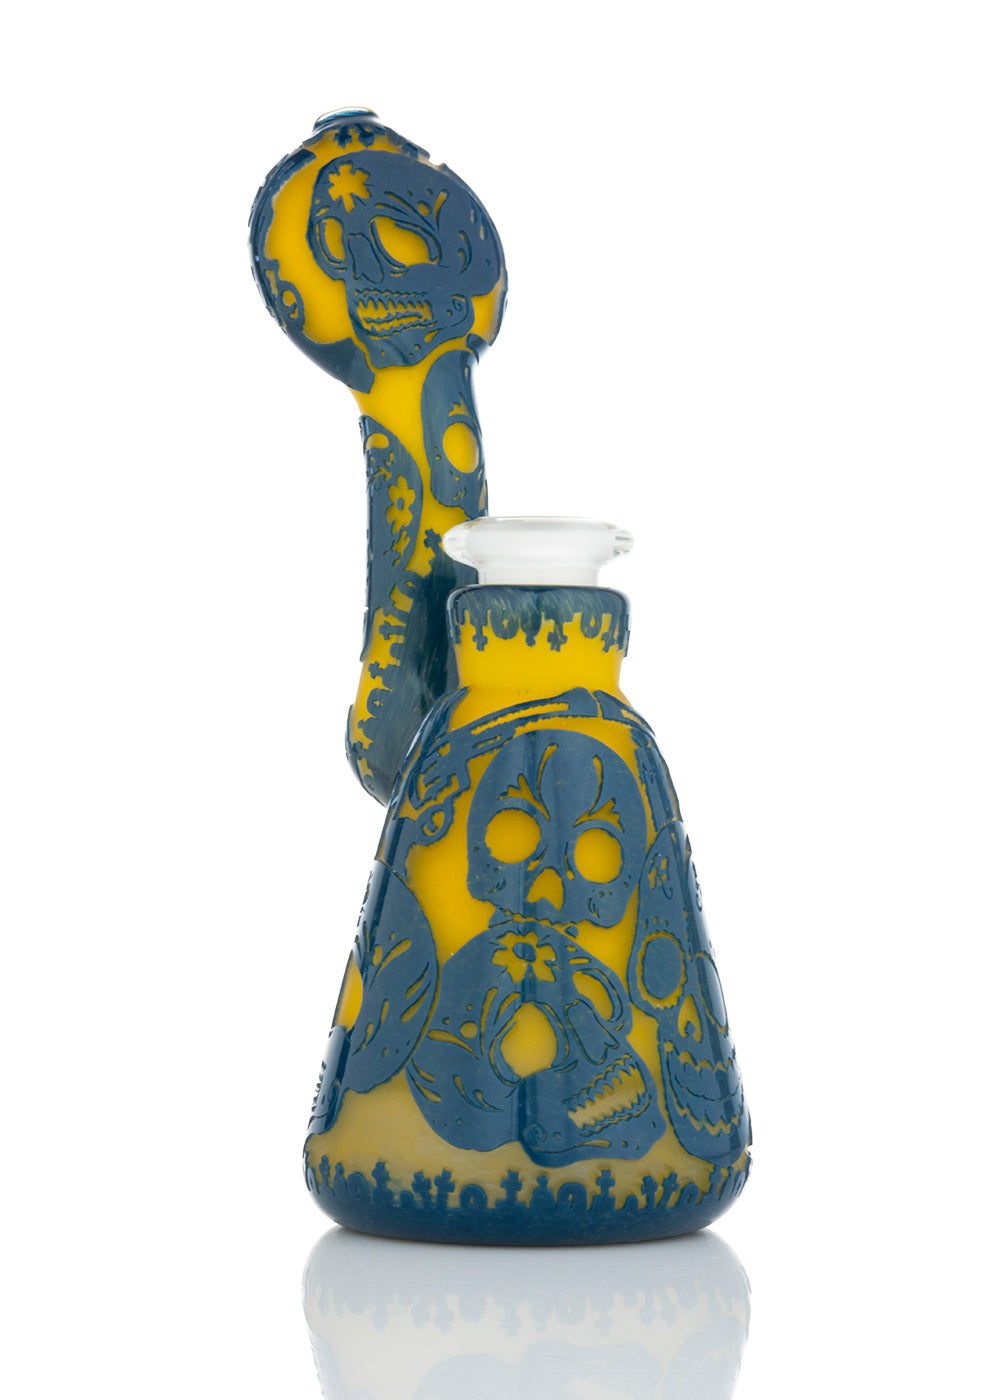 Standing Sherlock Rig in Yellow and Blue with Calavara Skulls by Liberty Glass